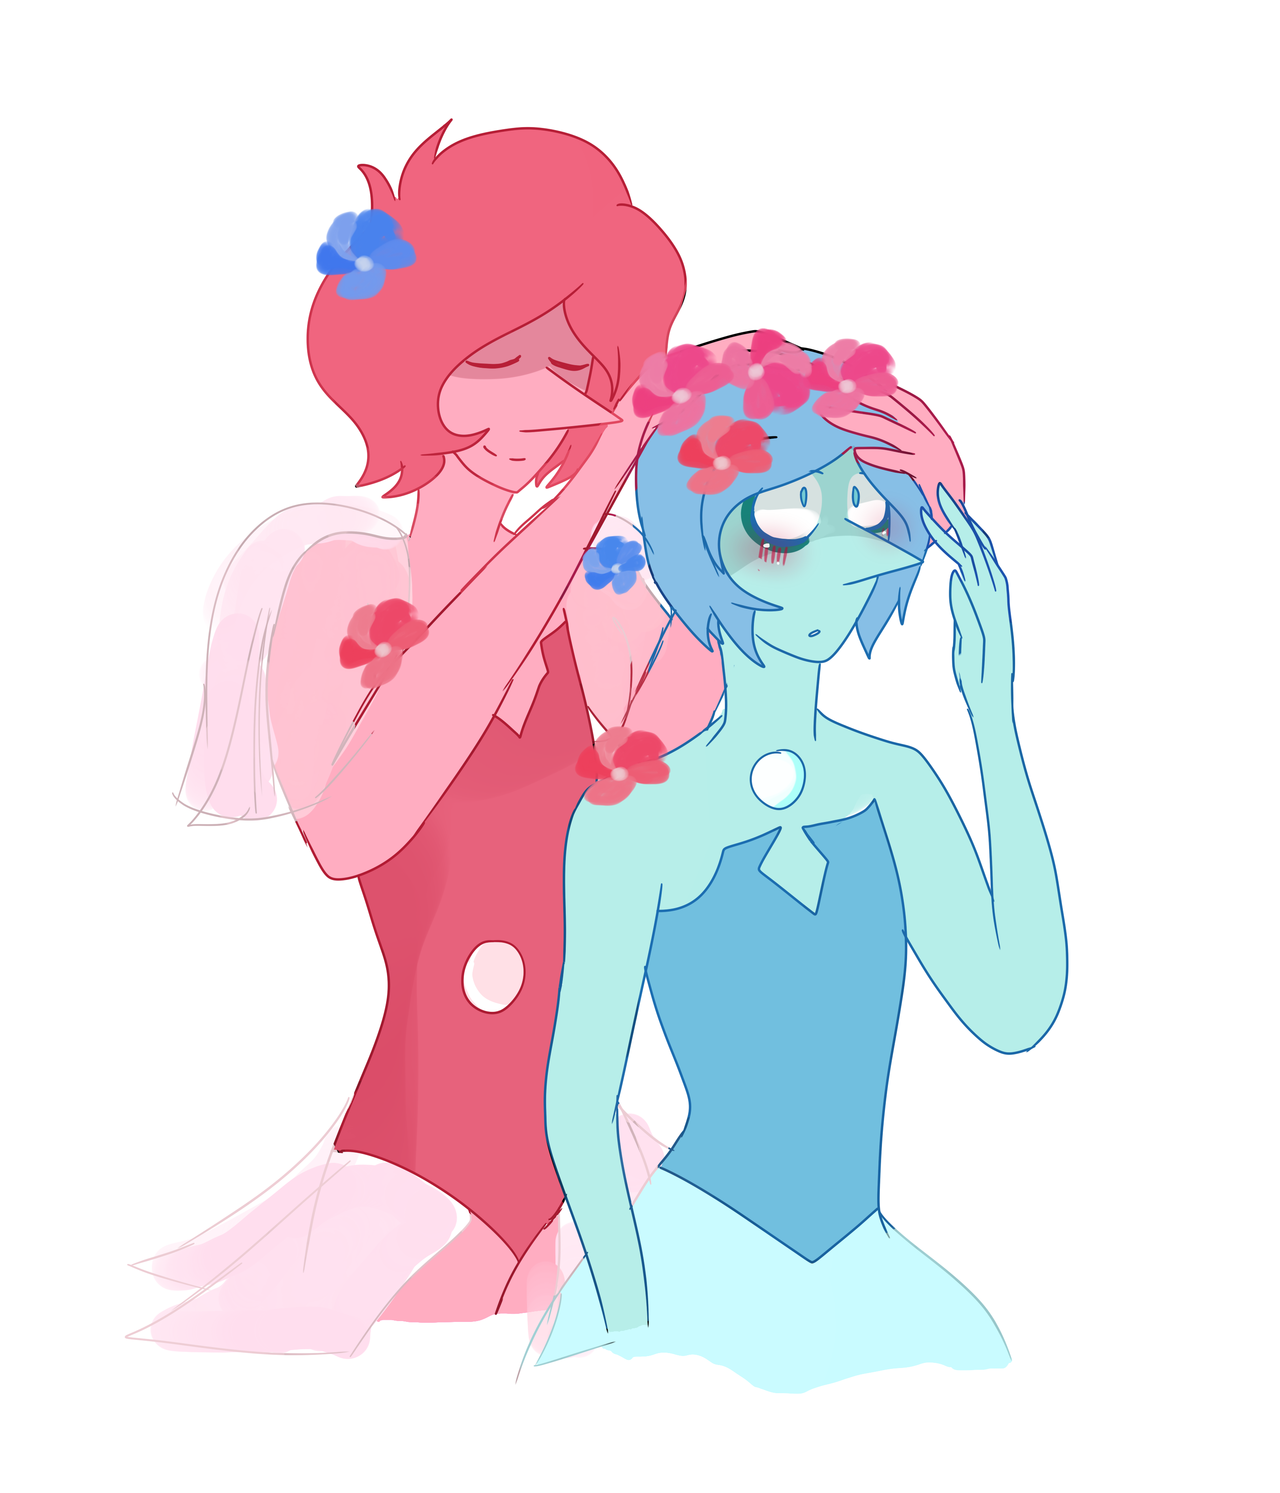 Pink Pearl having good time with pearls. I hope they were good friends